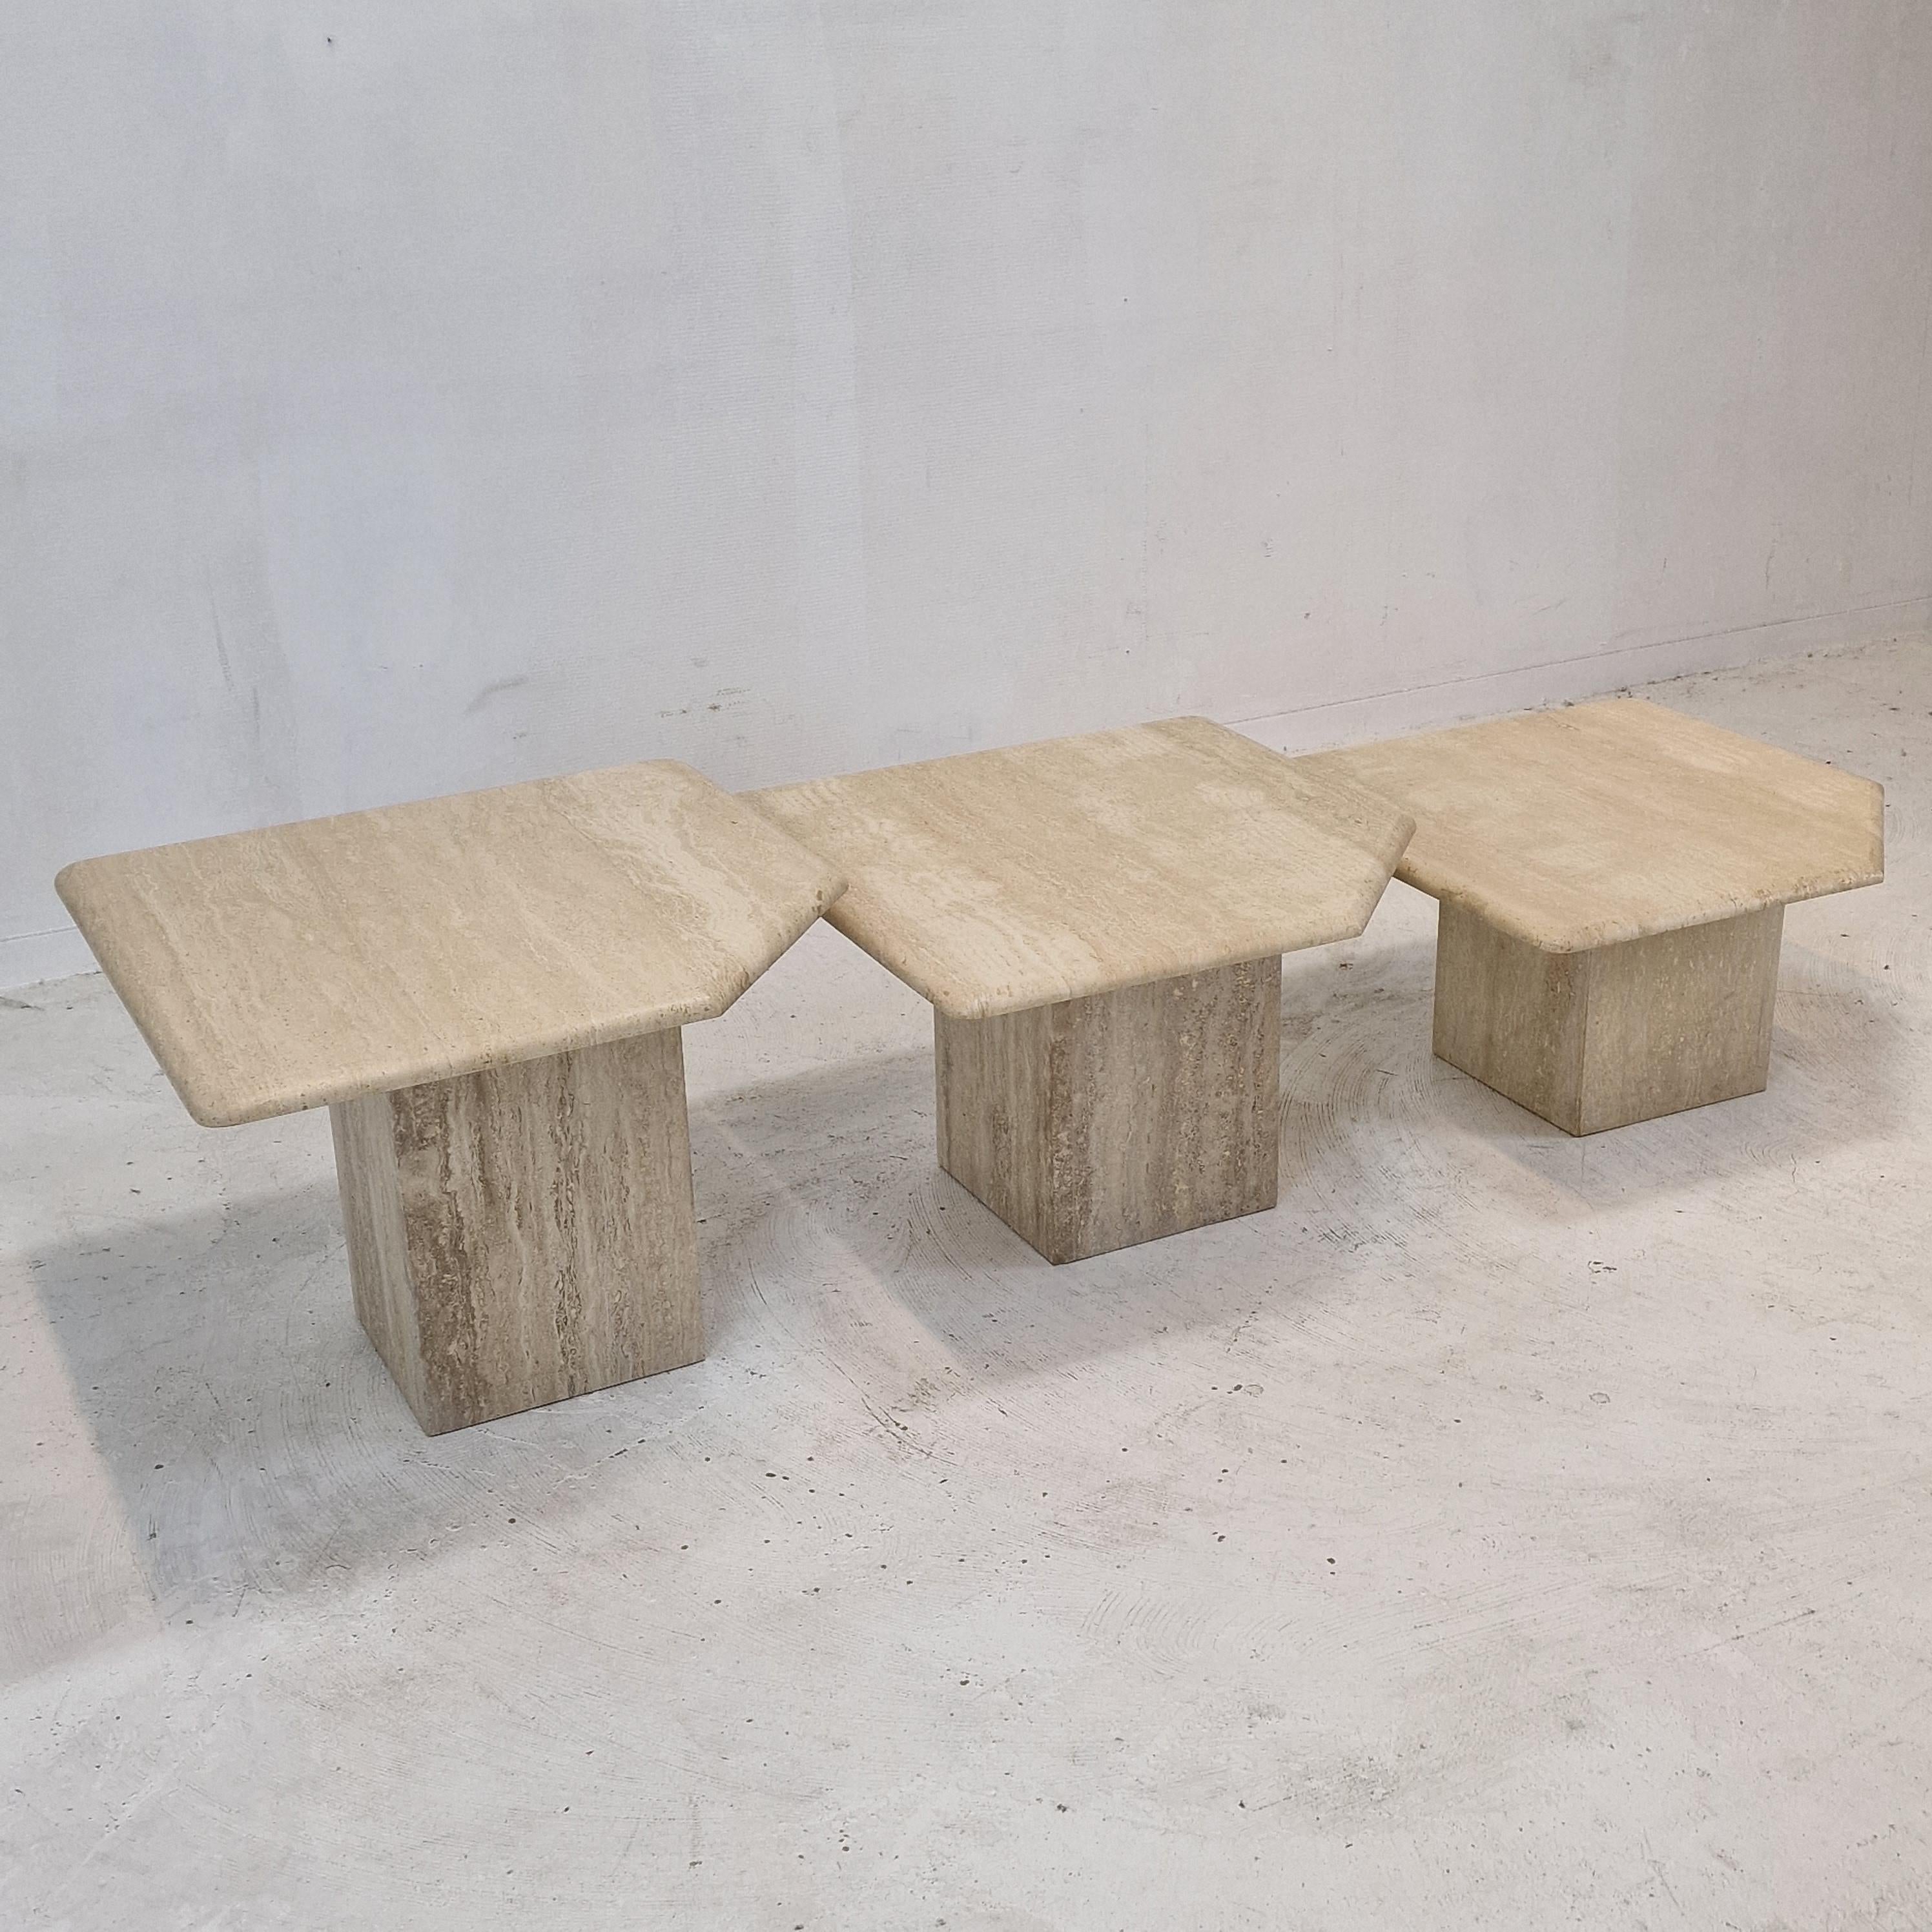 Hand-Crafted Set of 3 Italian Travertine Coffee or Side Tables, 1980s For Sale